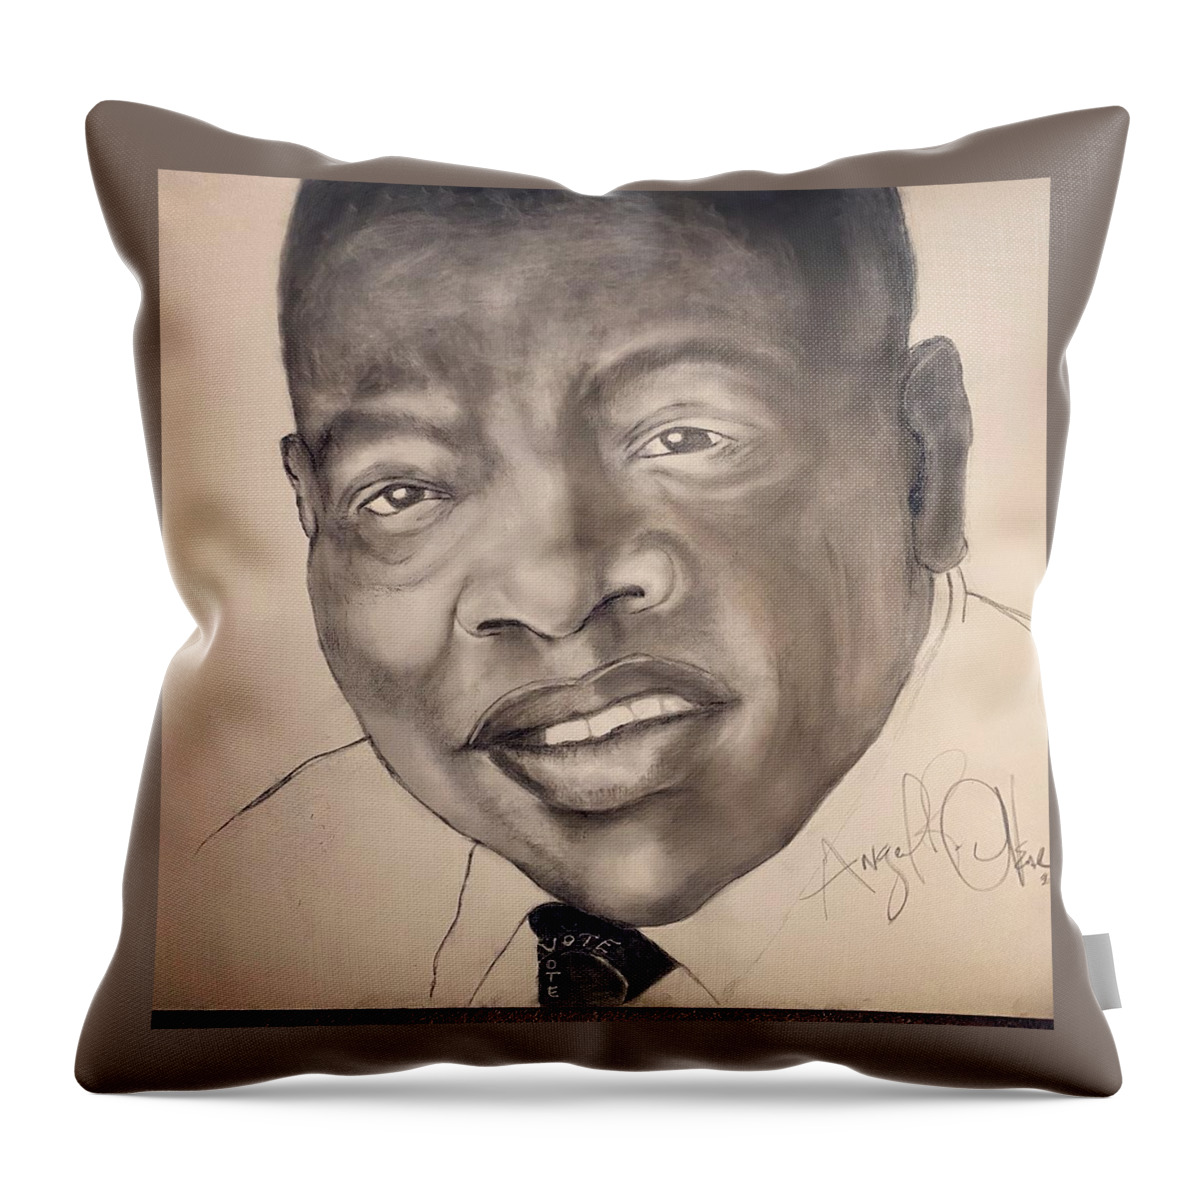  Throw Pillow featuring the drawing Good Trouble by Angie ONeal